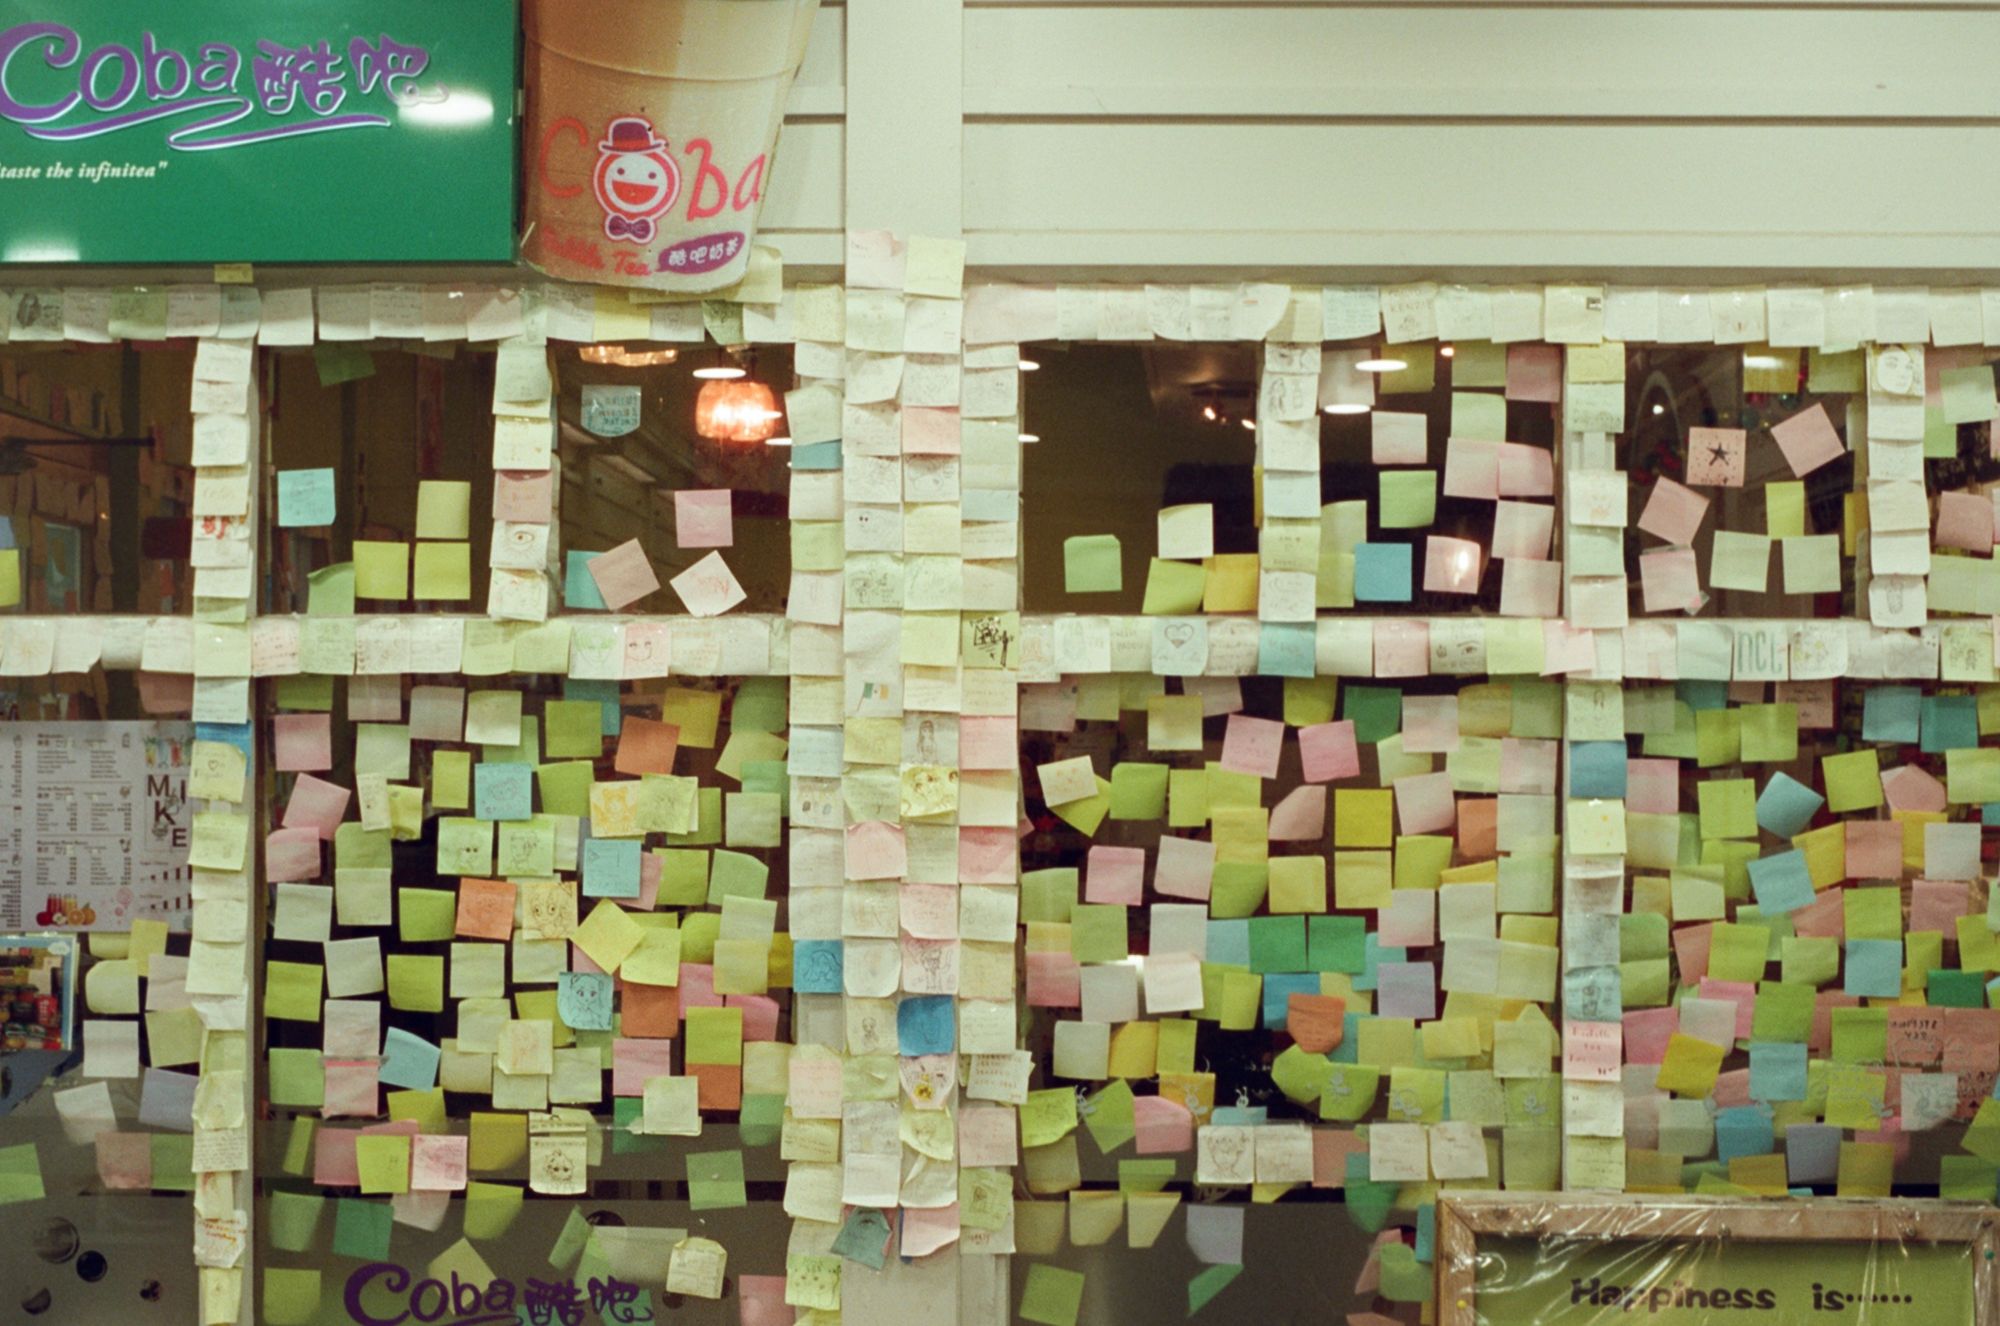 A boba tea shop called "Coba" with tons of colourful post-its from visitors stuck on the frames and glass of its windows.